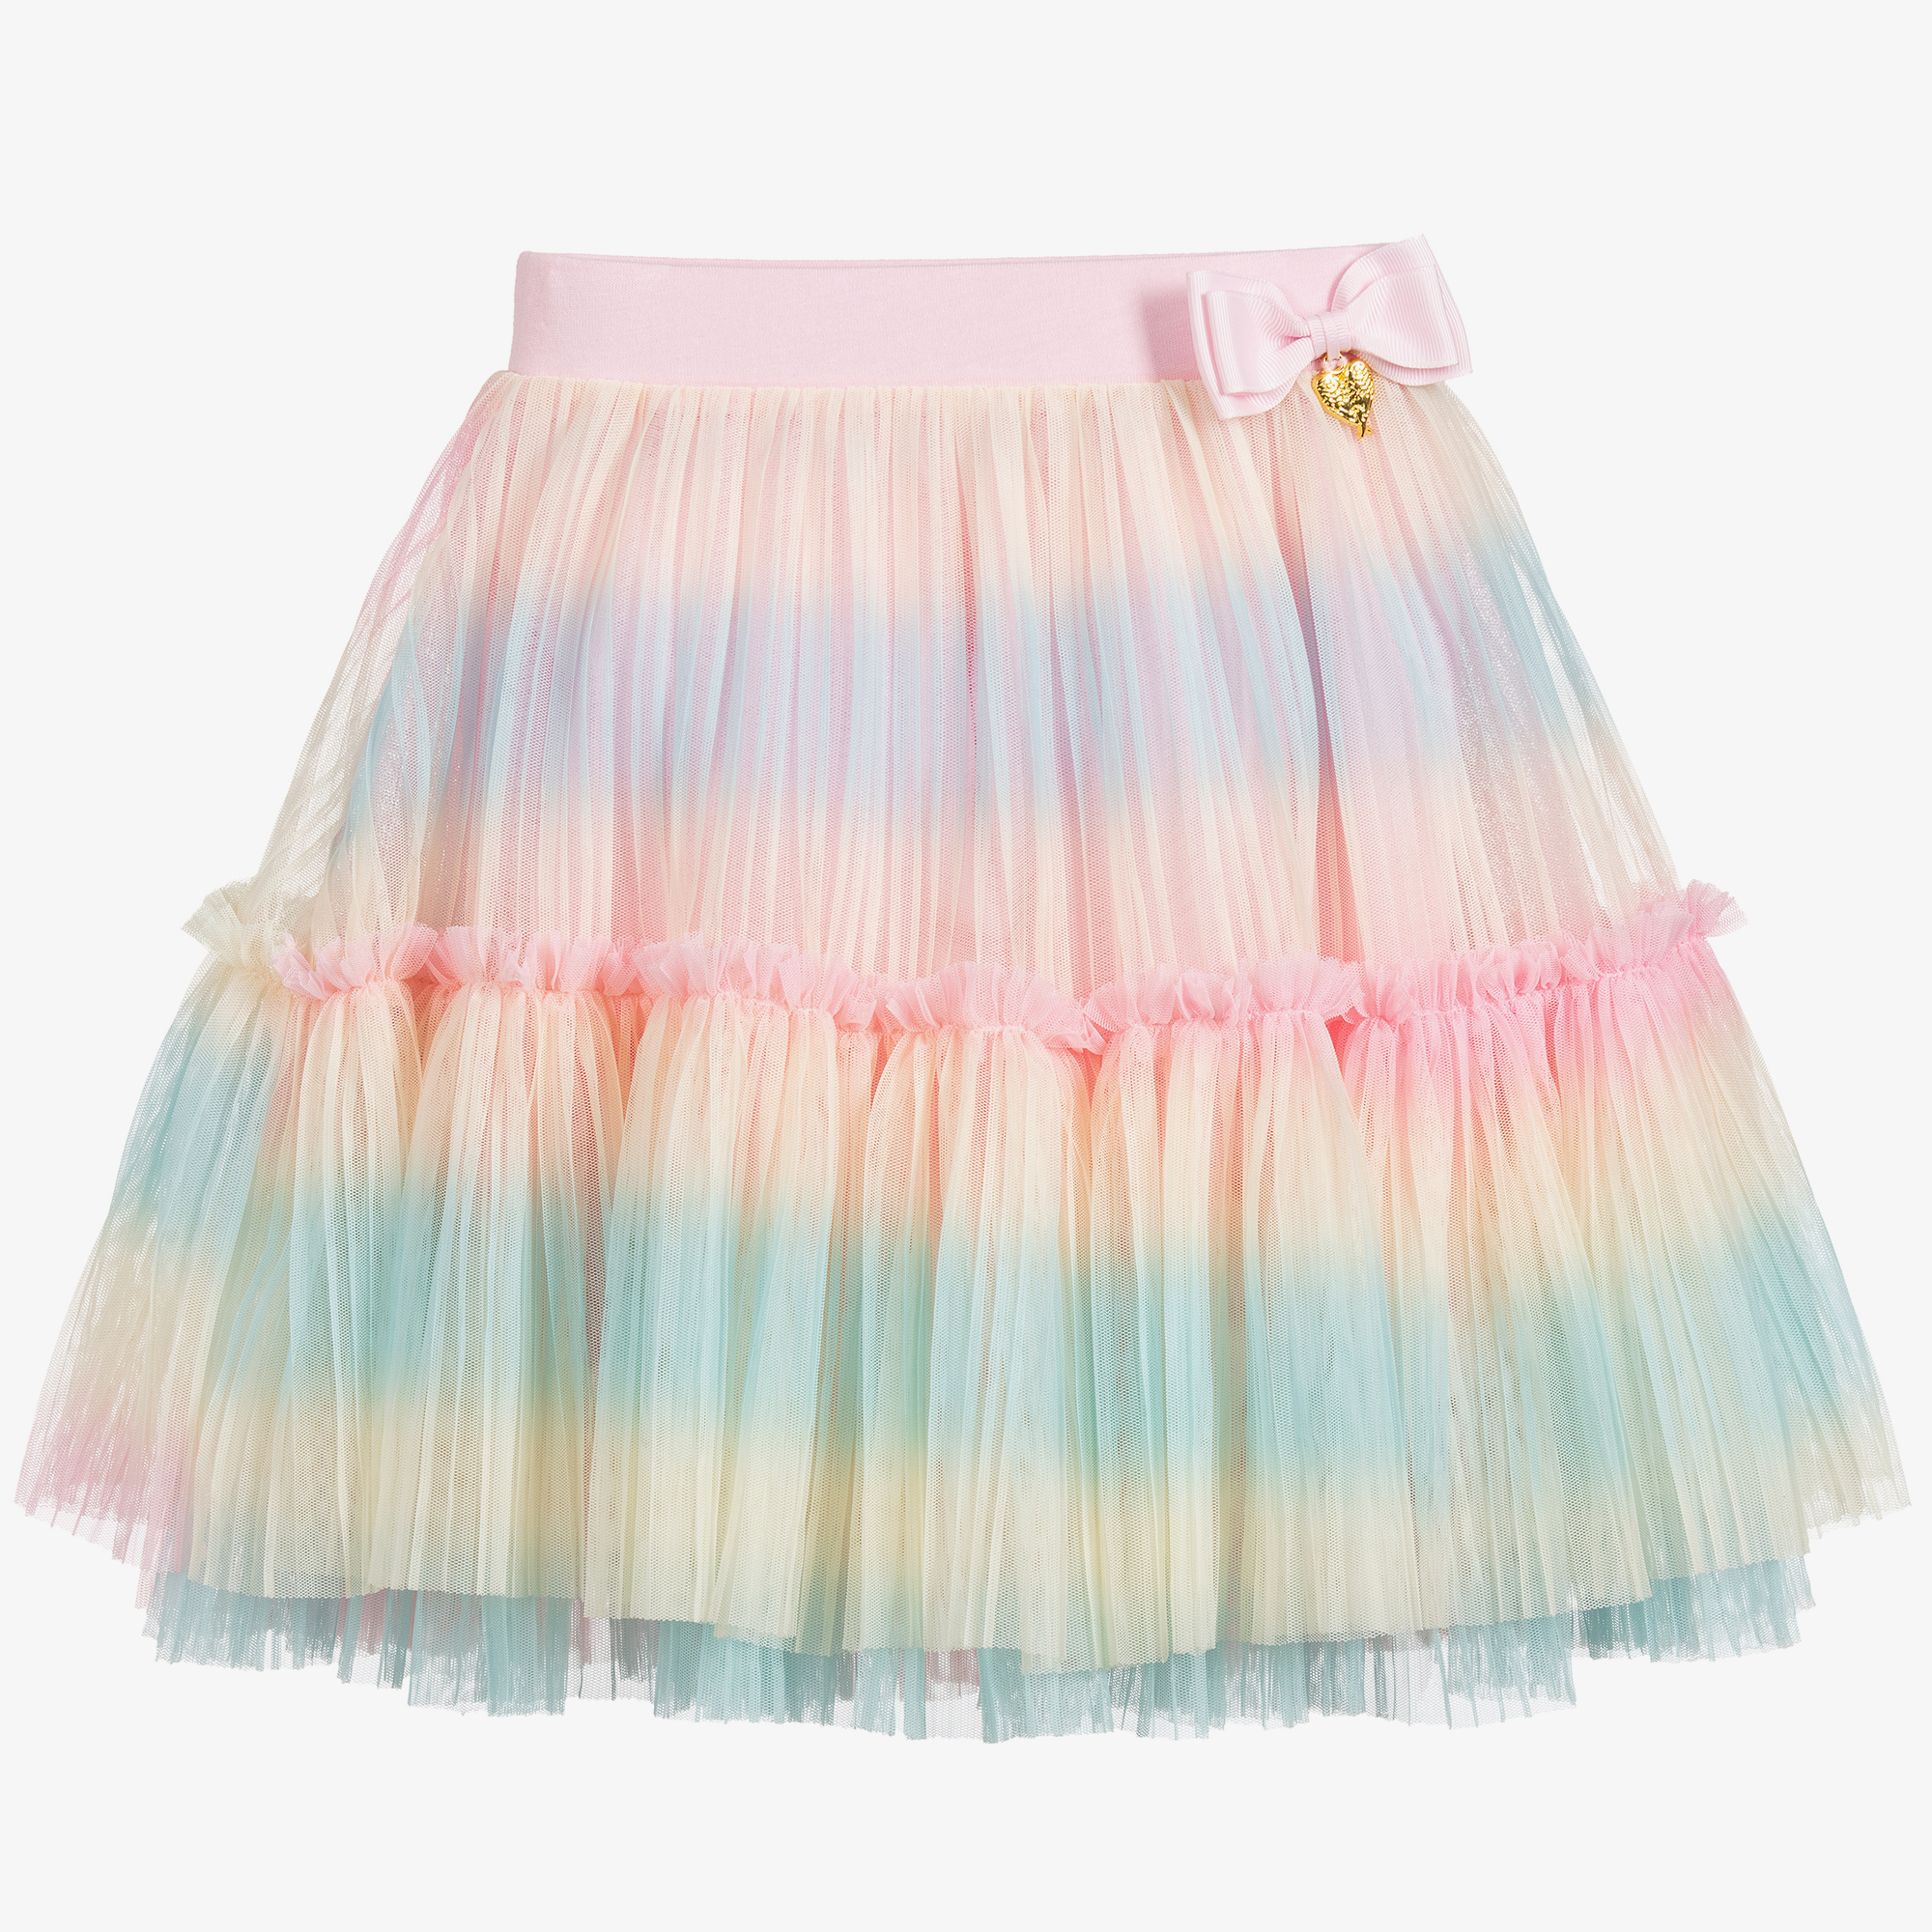 https://www.childrensalonoutlet.com/media/catalog/product/a/n/angel-s-face-pastel-stripes-tulle-skirt-293787-2aef4355b646ab0bf4b298e51204164e6a23f66f.jpg